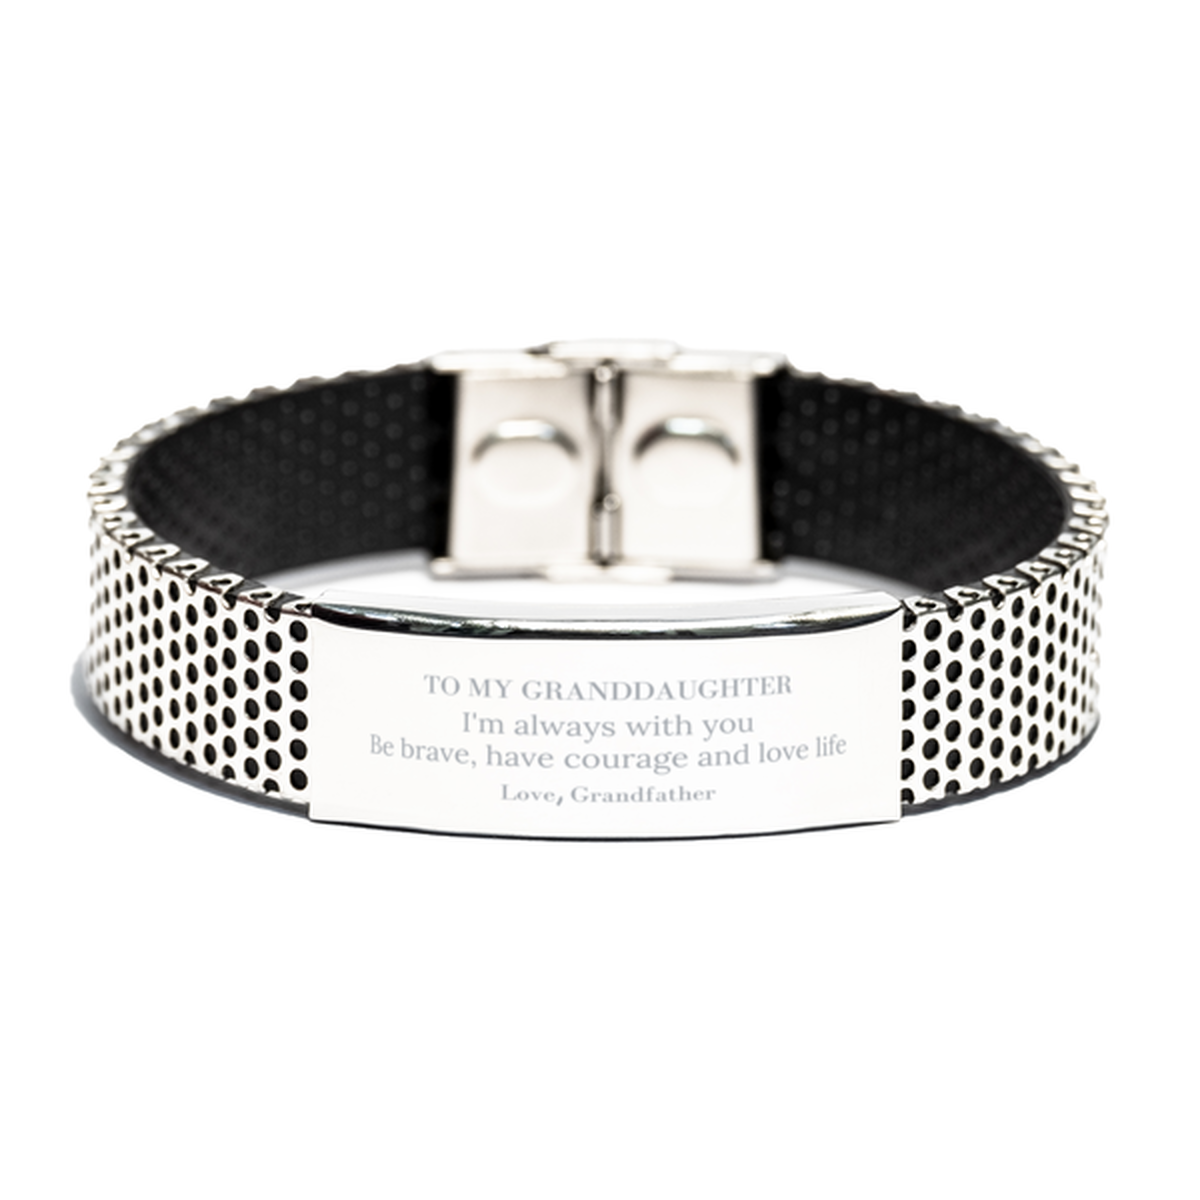 To My Granddaughter Gifts from Grandfather, Unique Stainless Steel Bracelet Inspirational Christmas Birthday Graduation Gifts for Granddaughter I'm always with you. Be brave, have courage and love life. Love, Grandfather